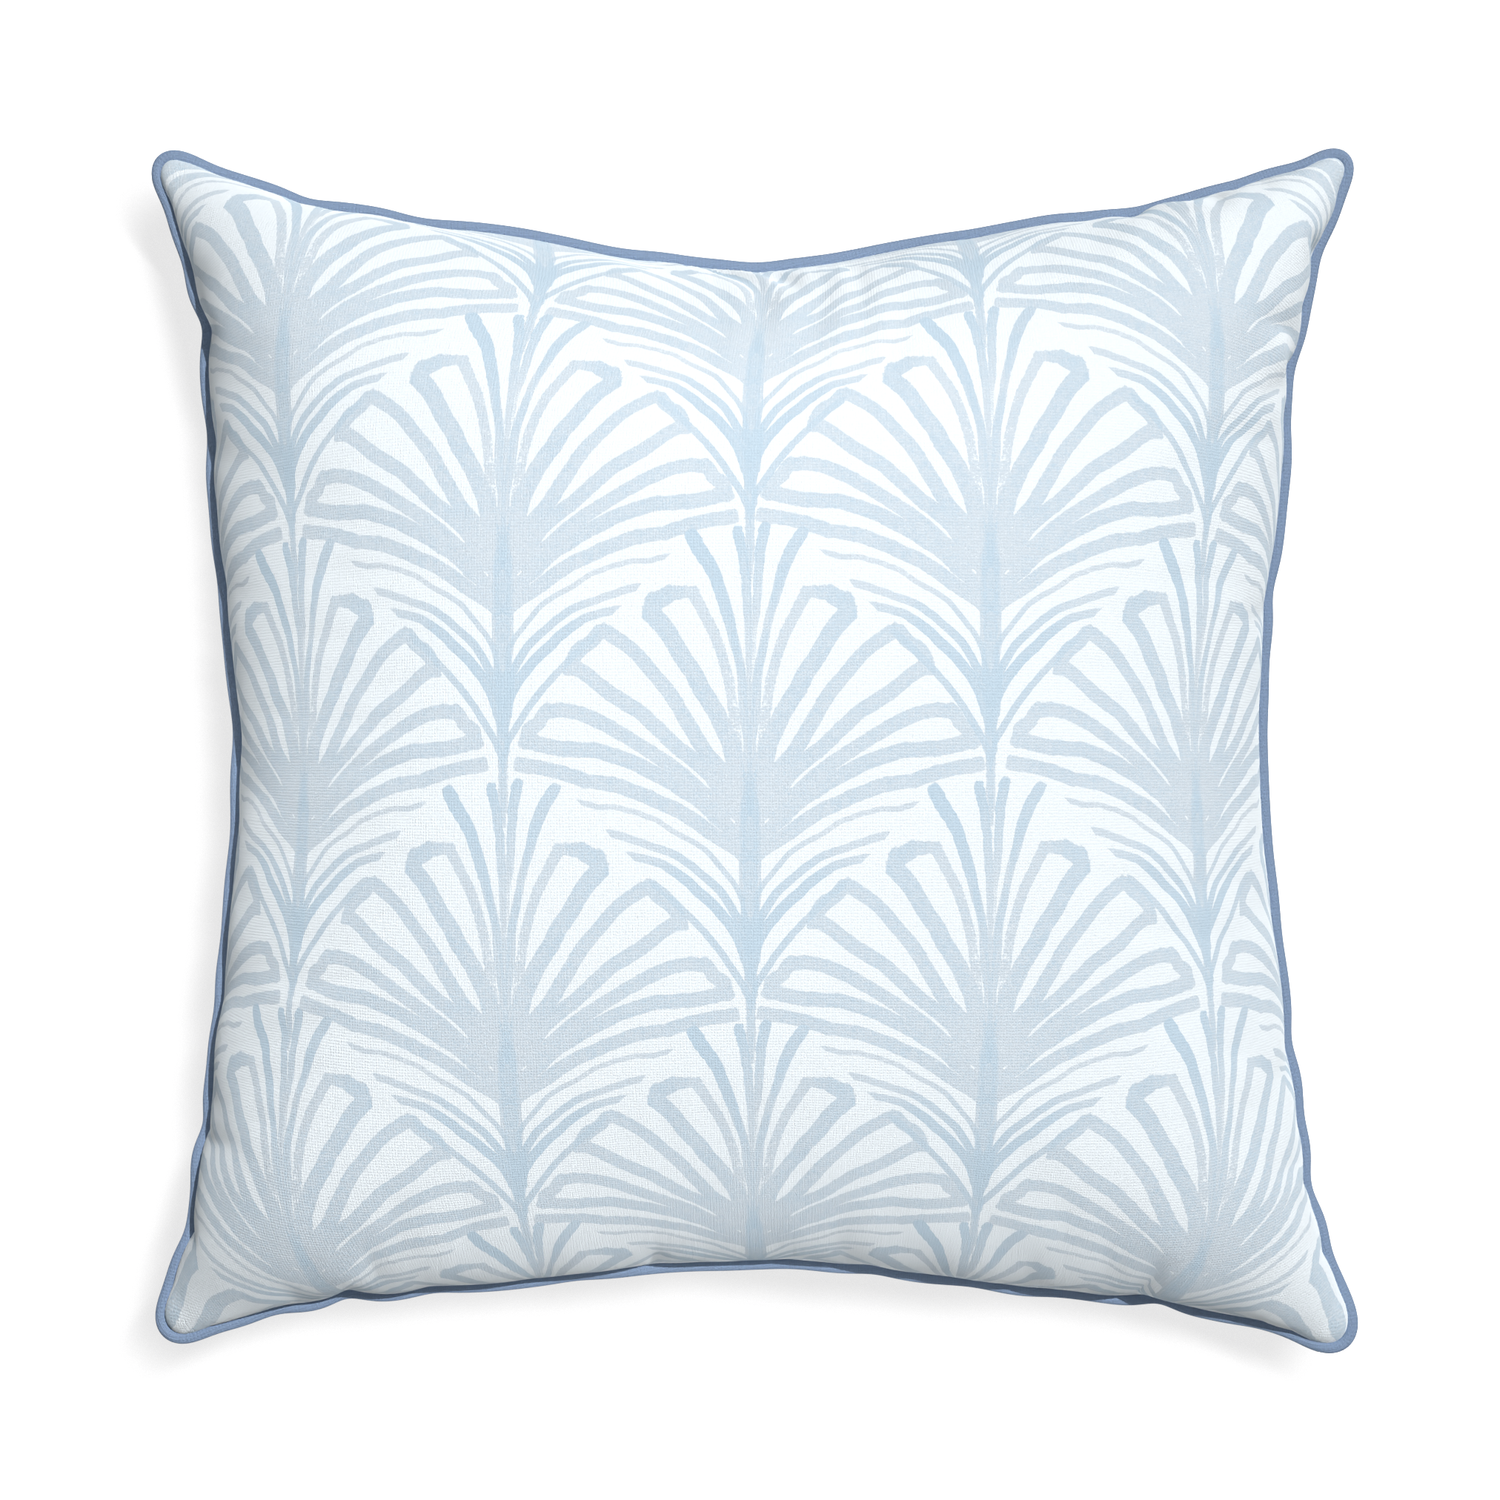 Euro-sham suzy sky custom pillow with sky piping on white background